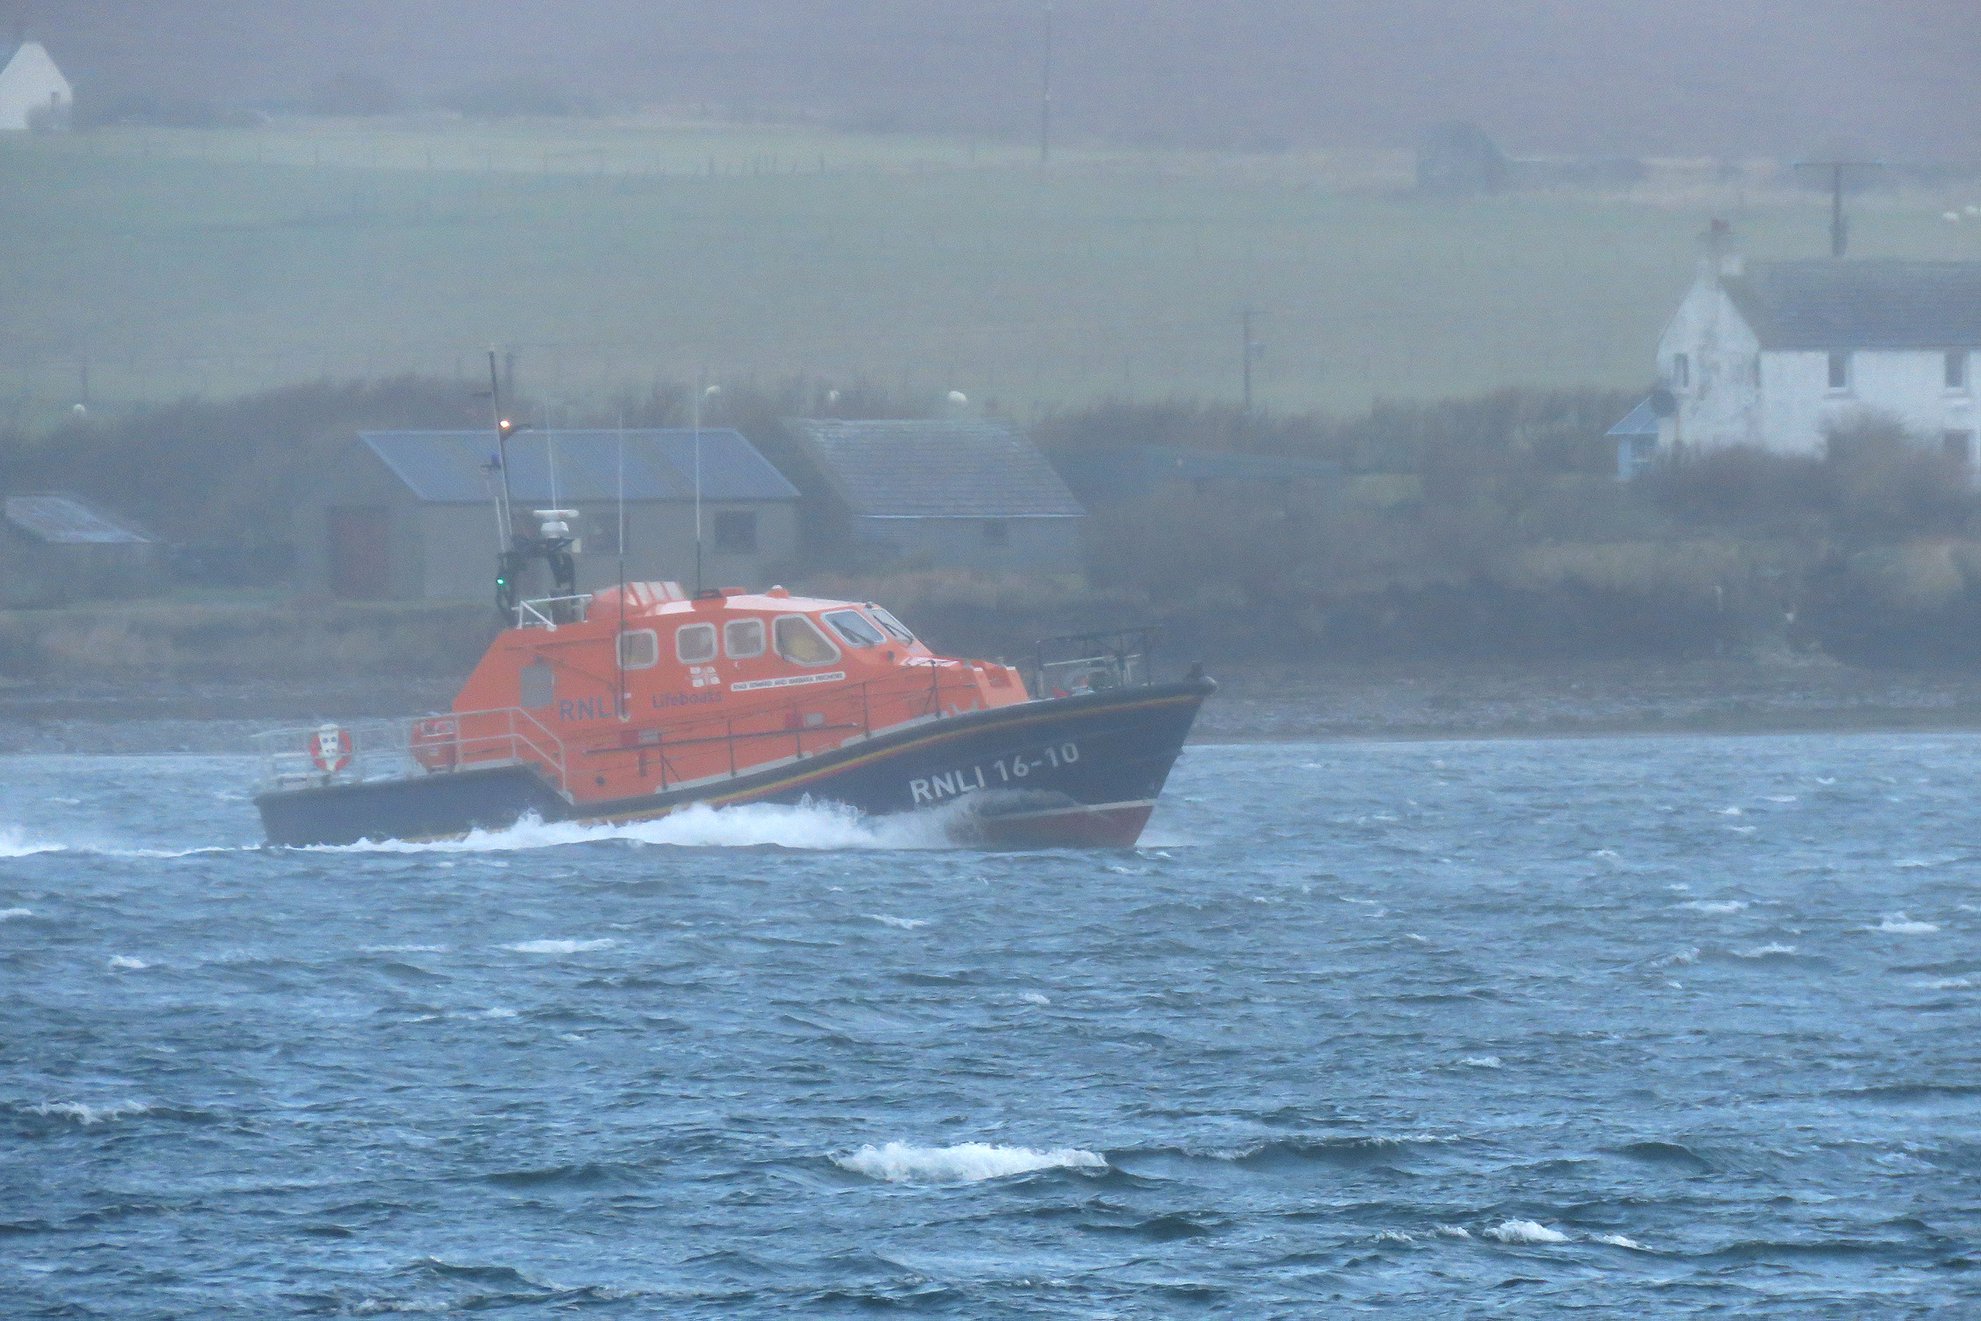 The Longhope Lifeboat